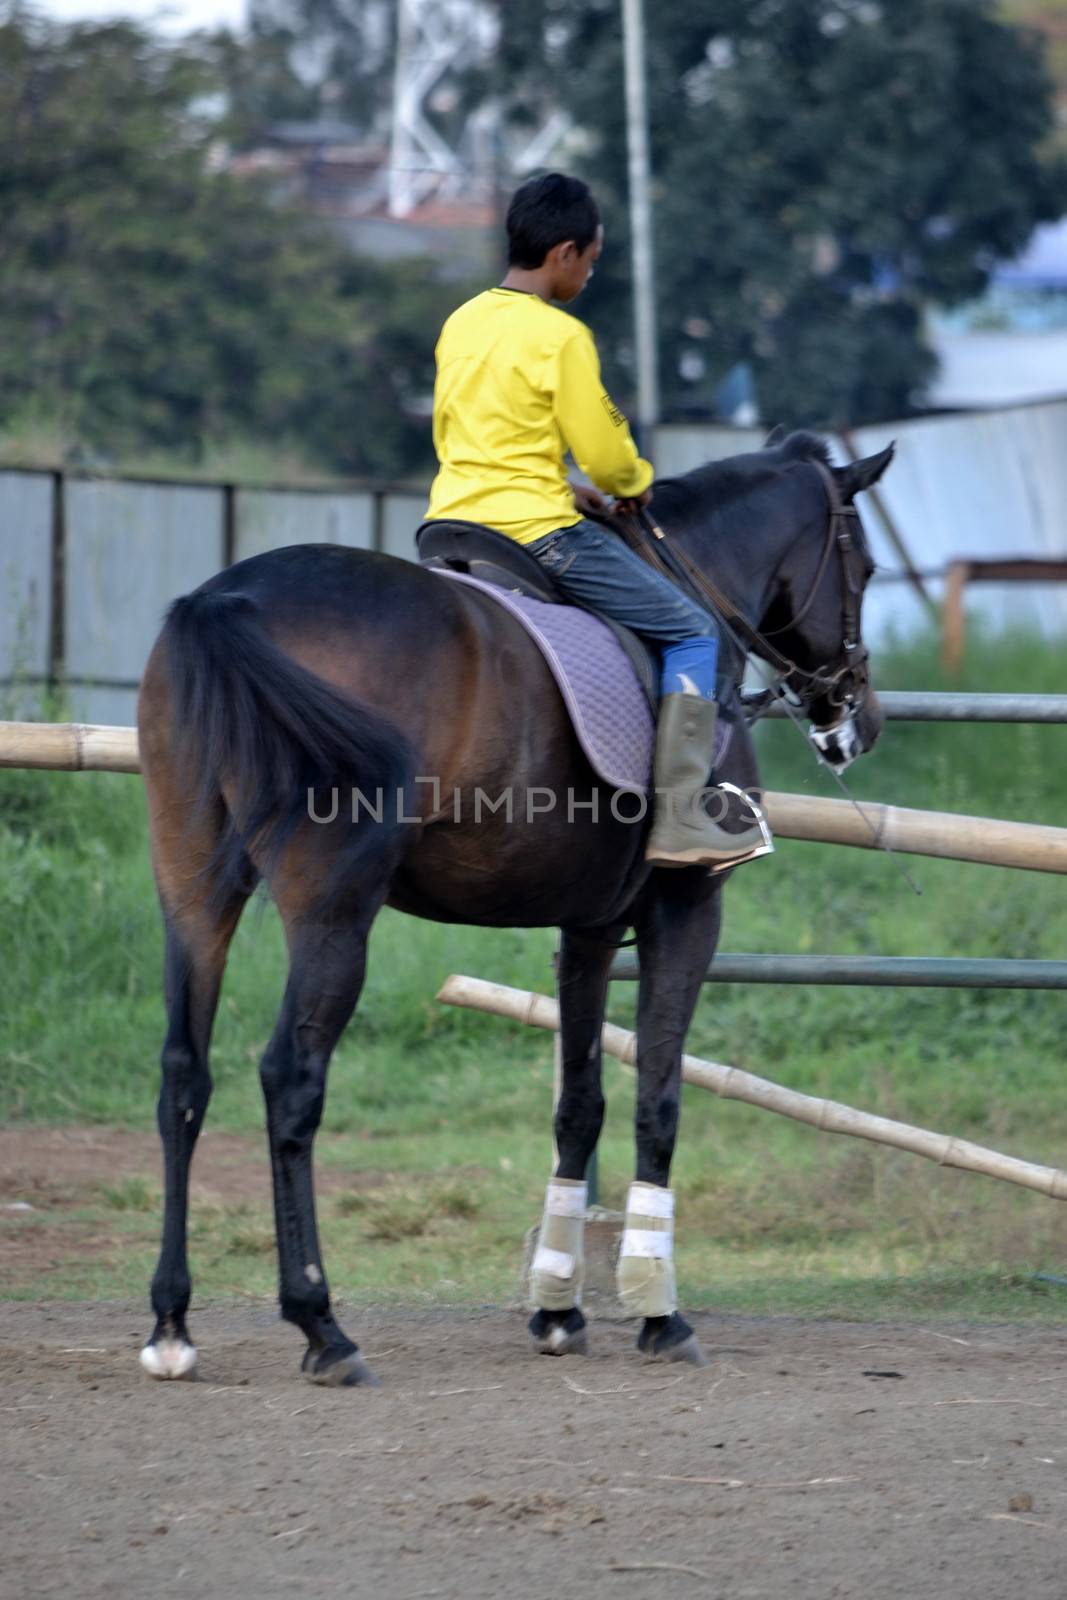 bandung, indonesia-may 31, 2014-young boy learn to riding a horse in arcamanik horse race arena